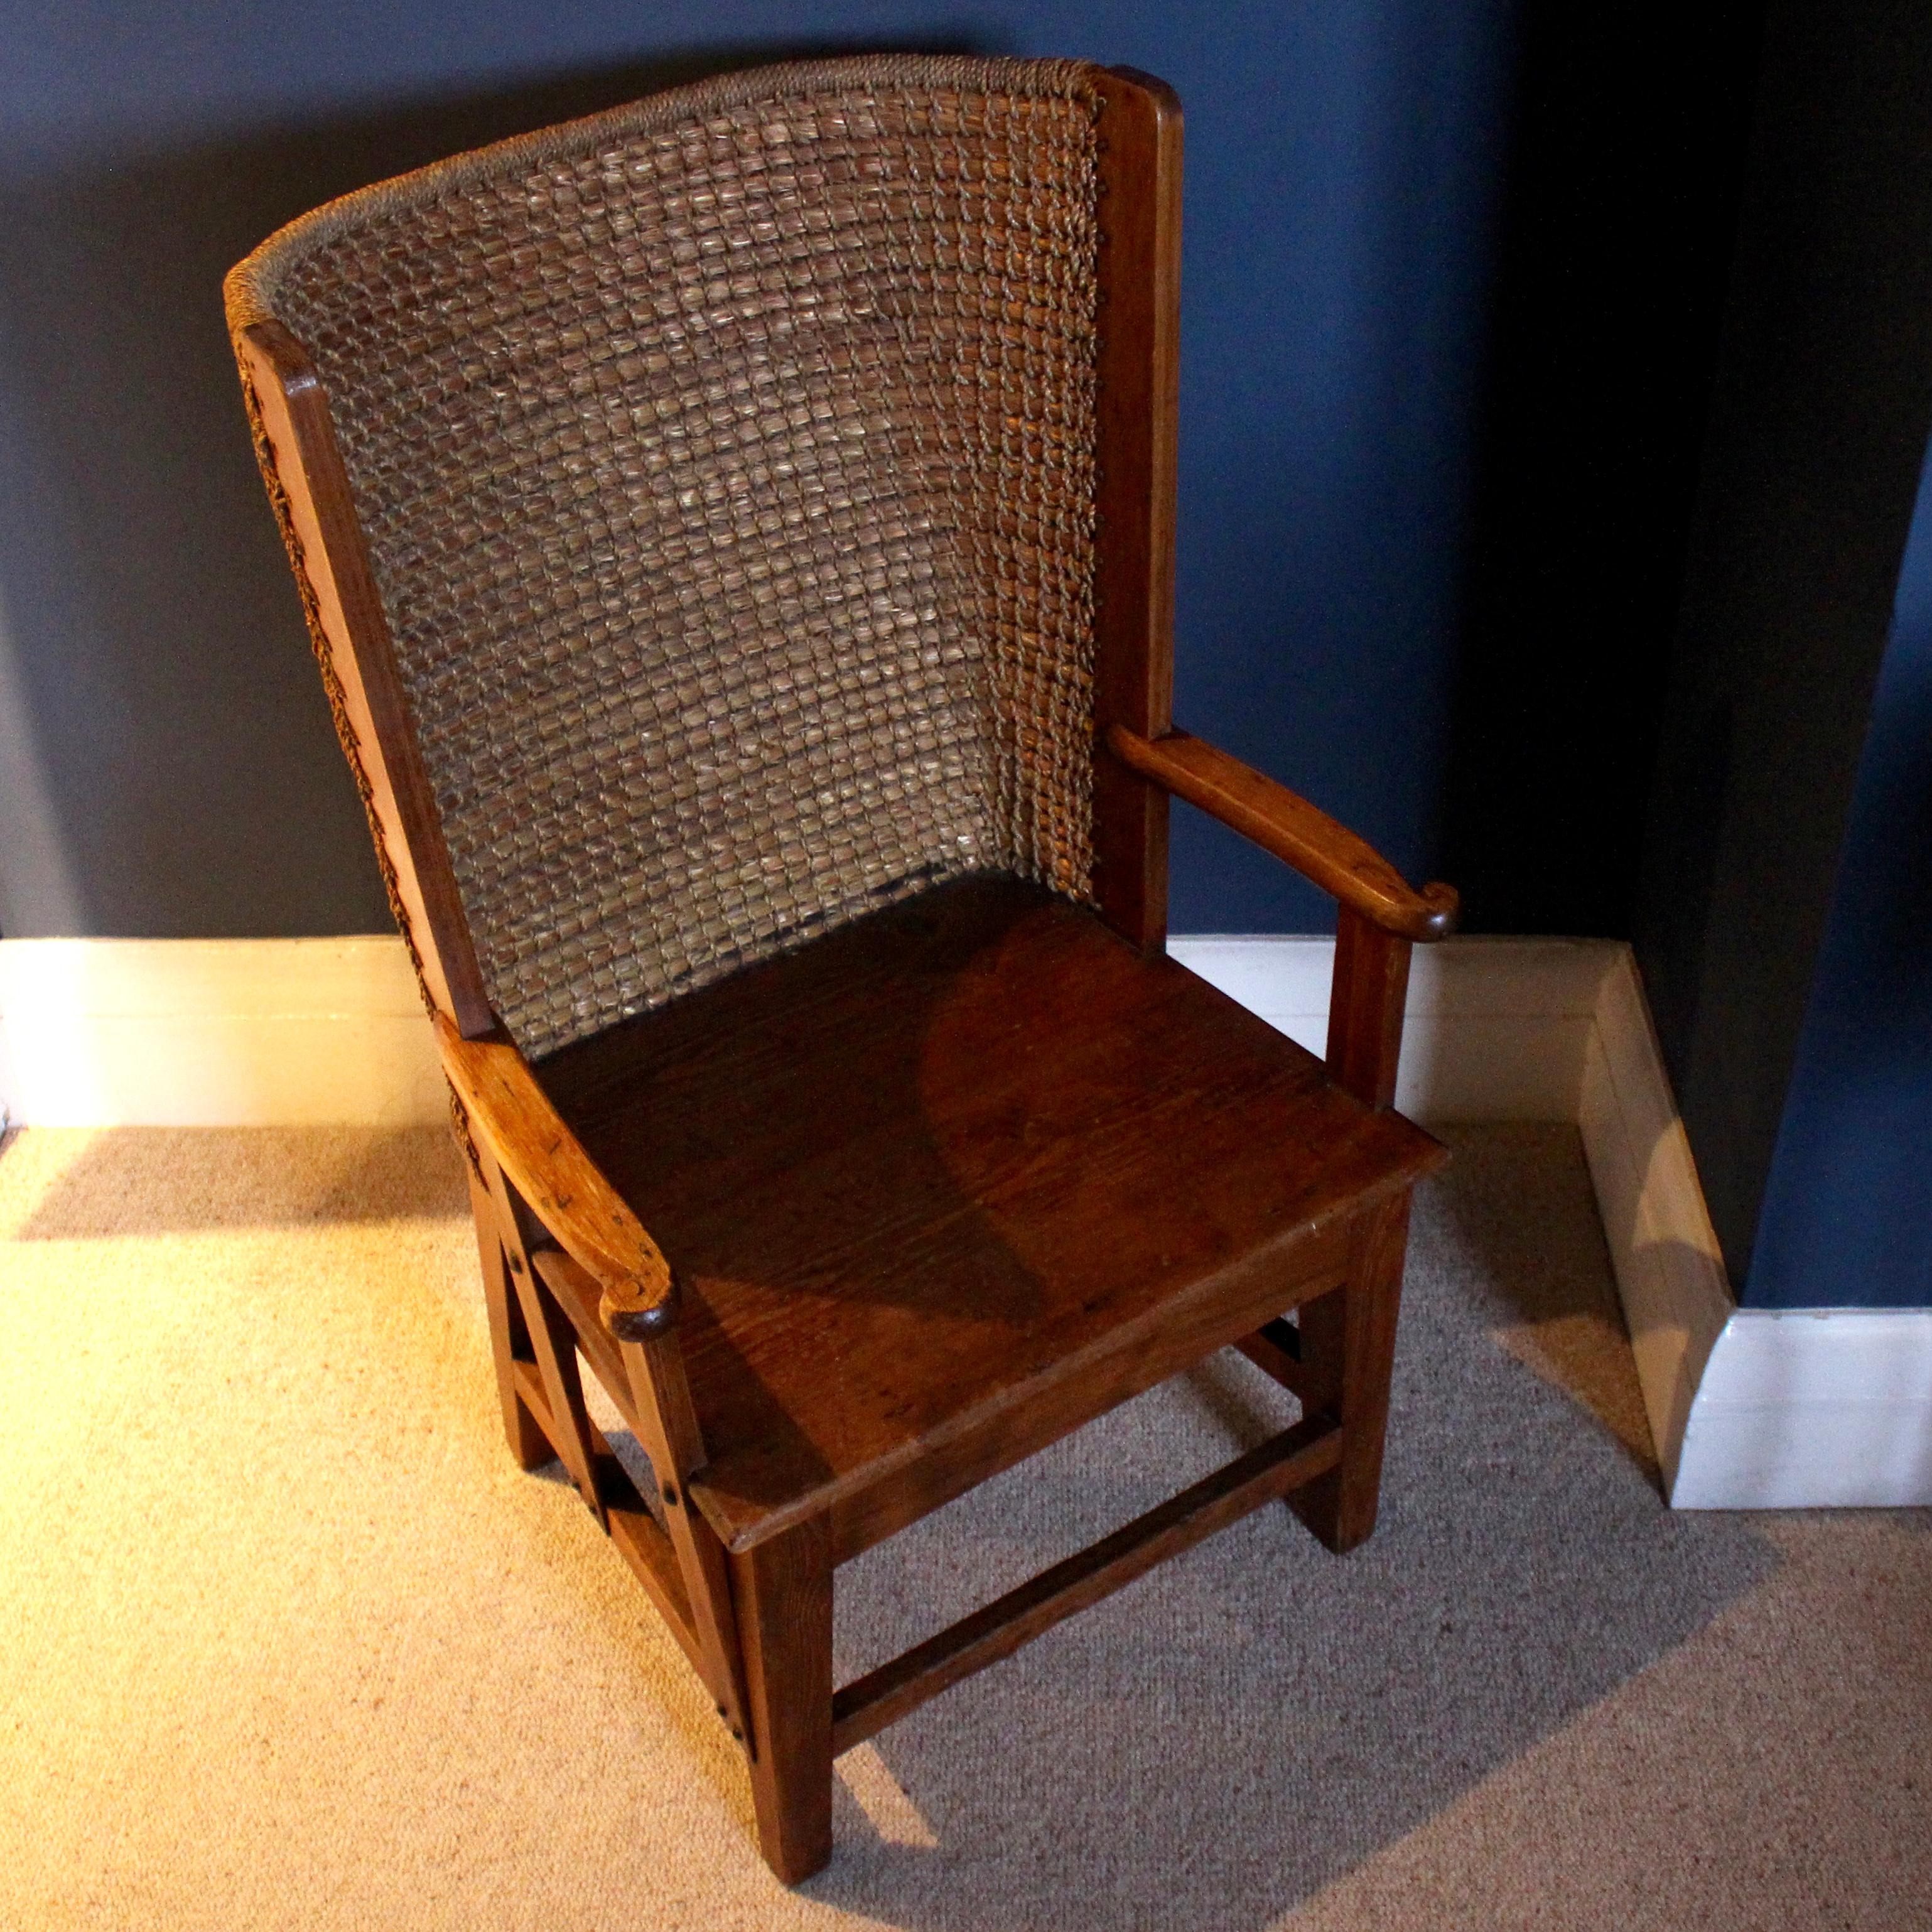 Straw Ladies Pine Orkney Chair of Small Proportions, circa 1920